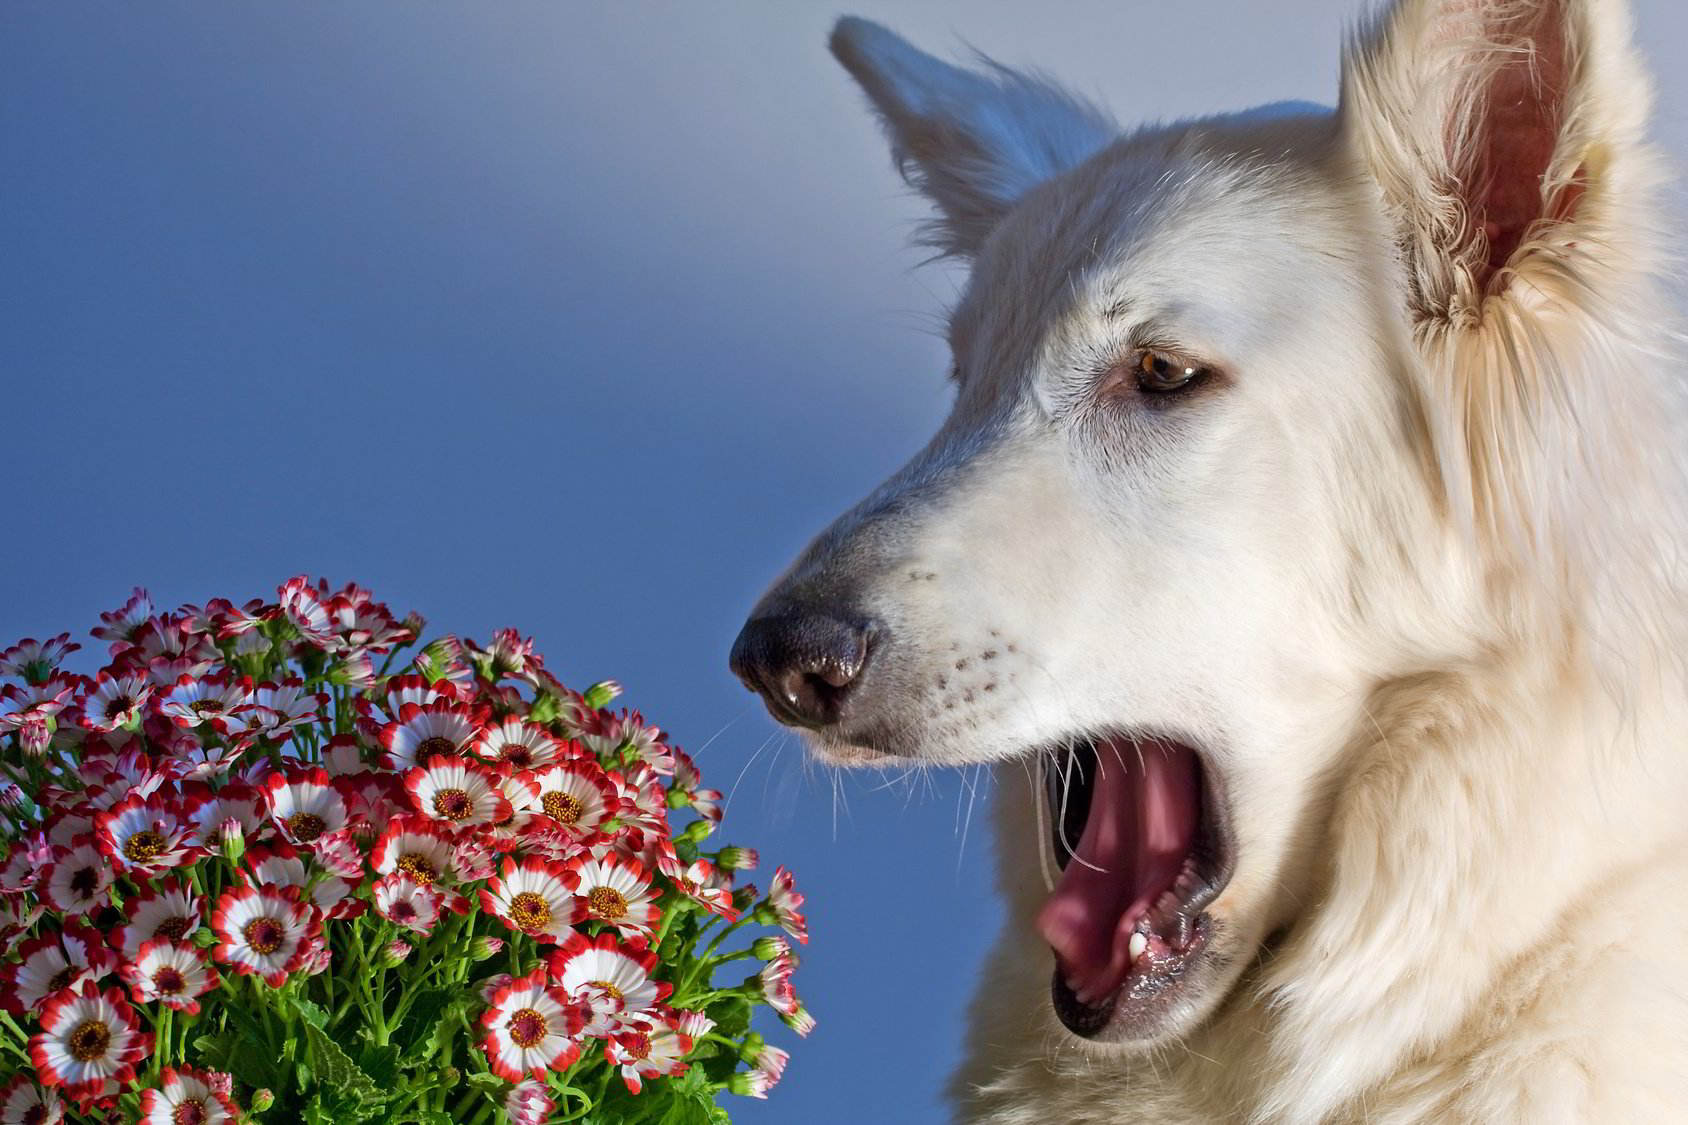 Can Dogs Have Allergies?